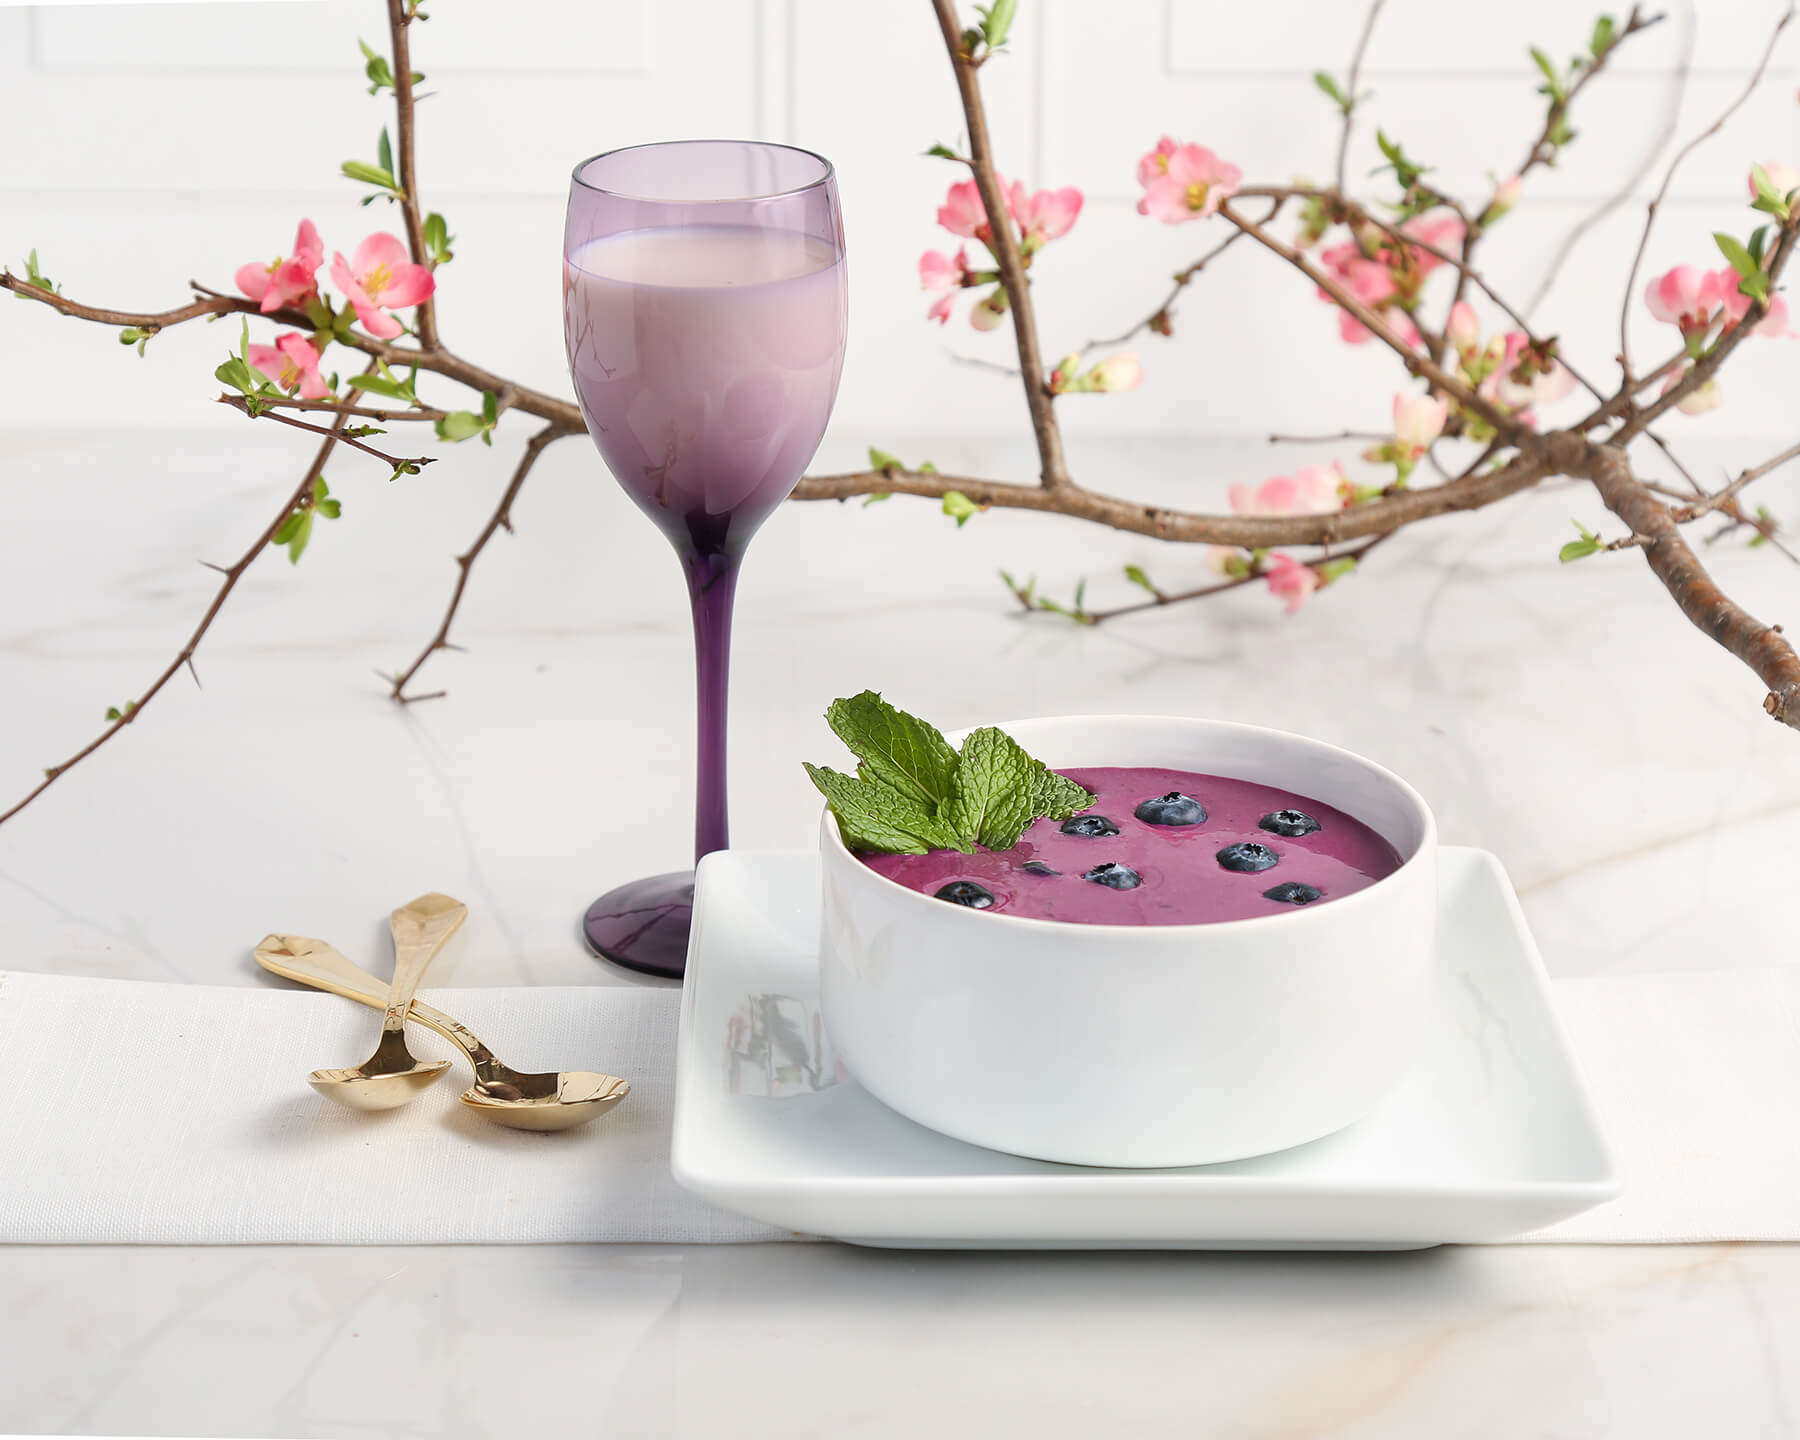 Chilled Blueberry Bisque